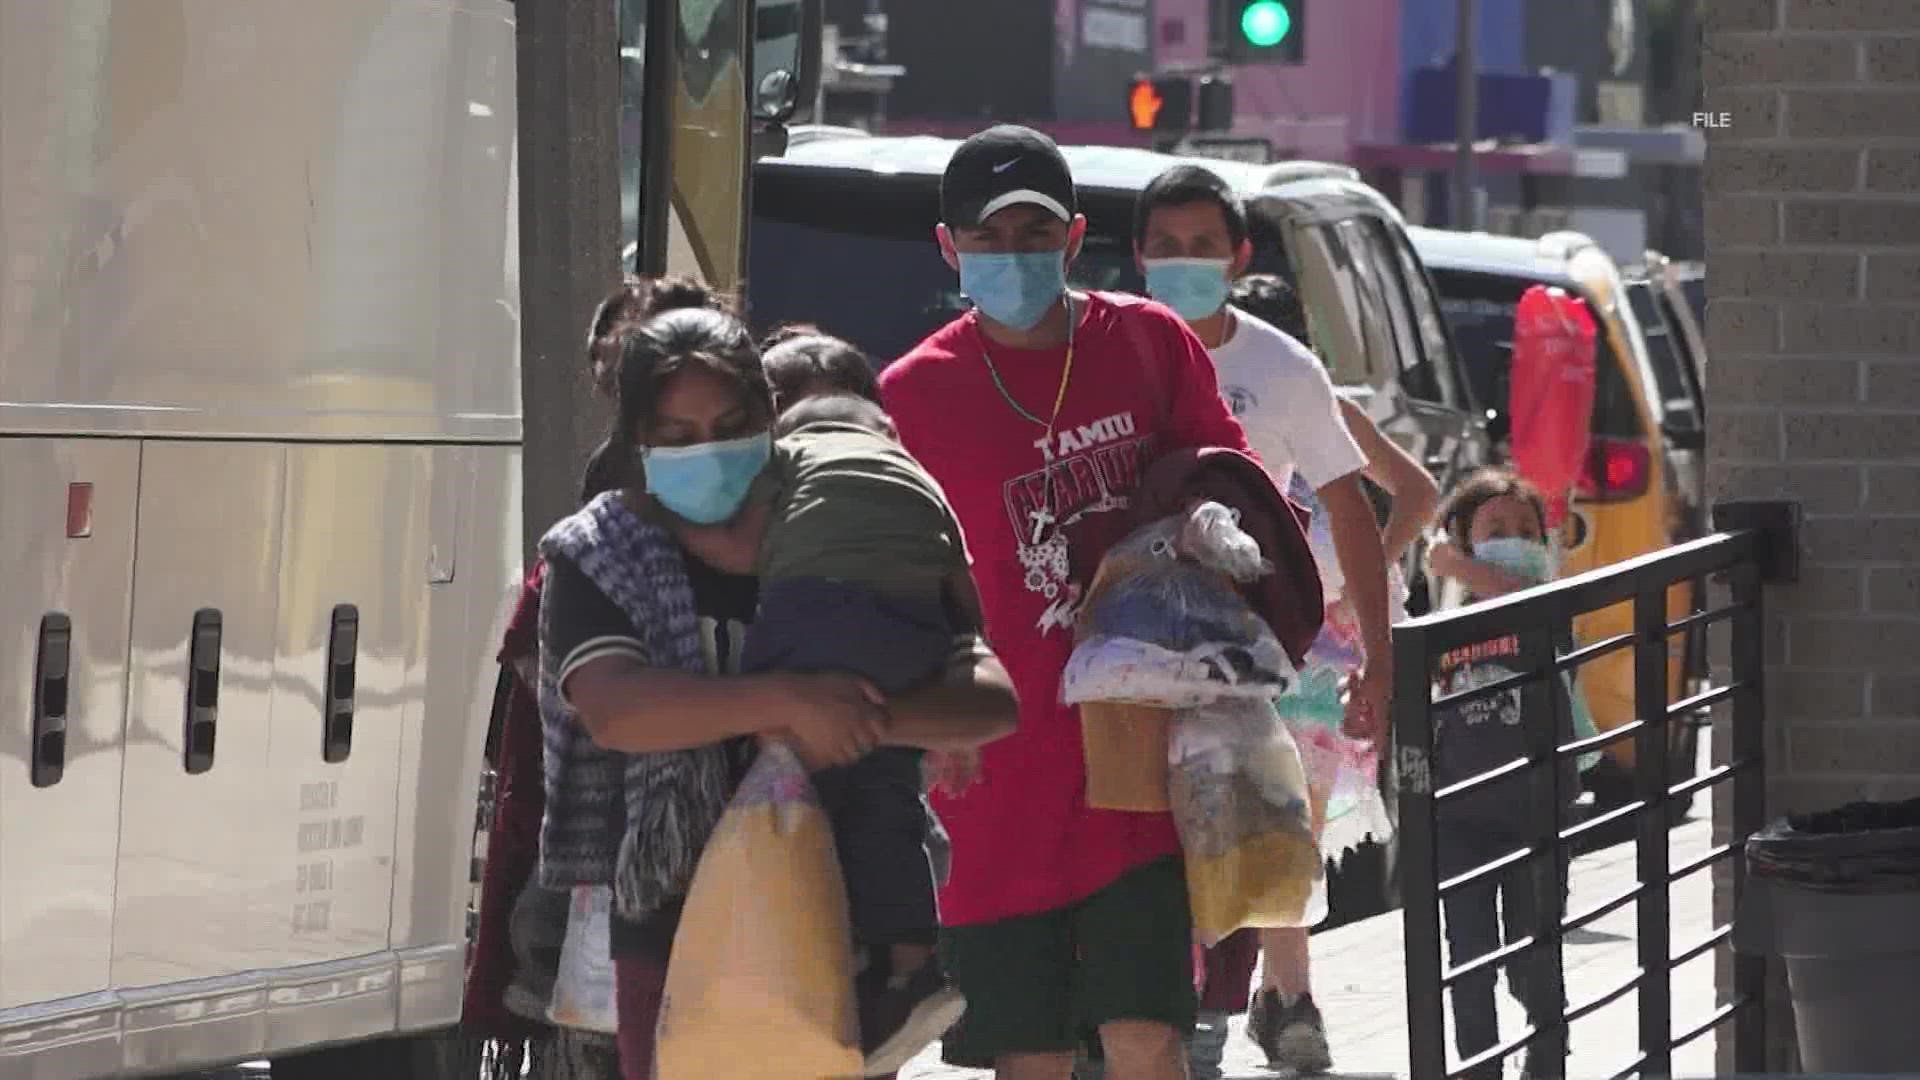 Some are blaming migrants for the COVID surge, but doctors tracking the virus in South Texas say this is "not a pandemic of the migrants."